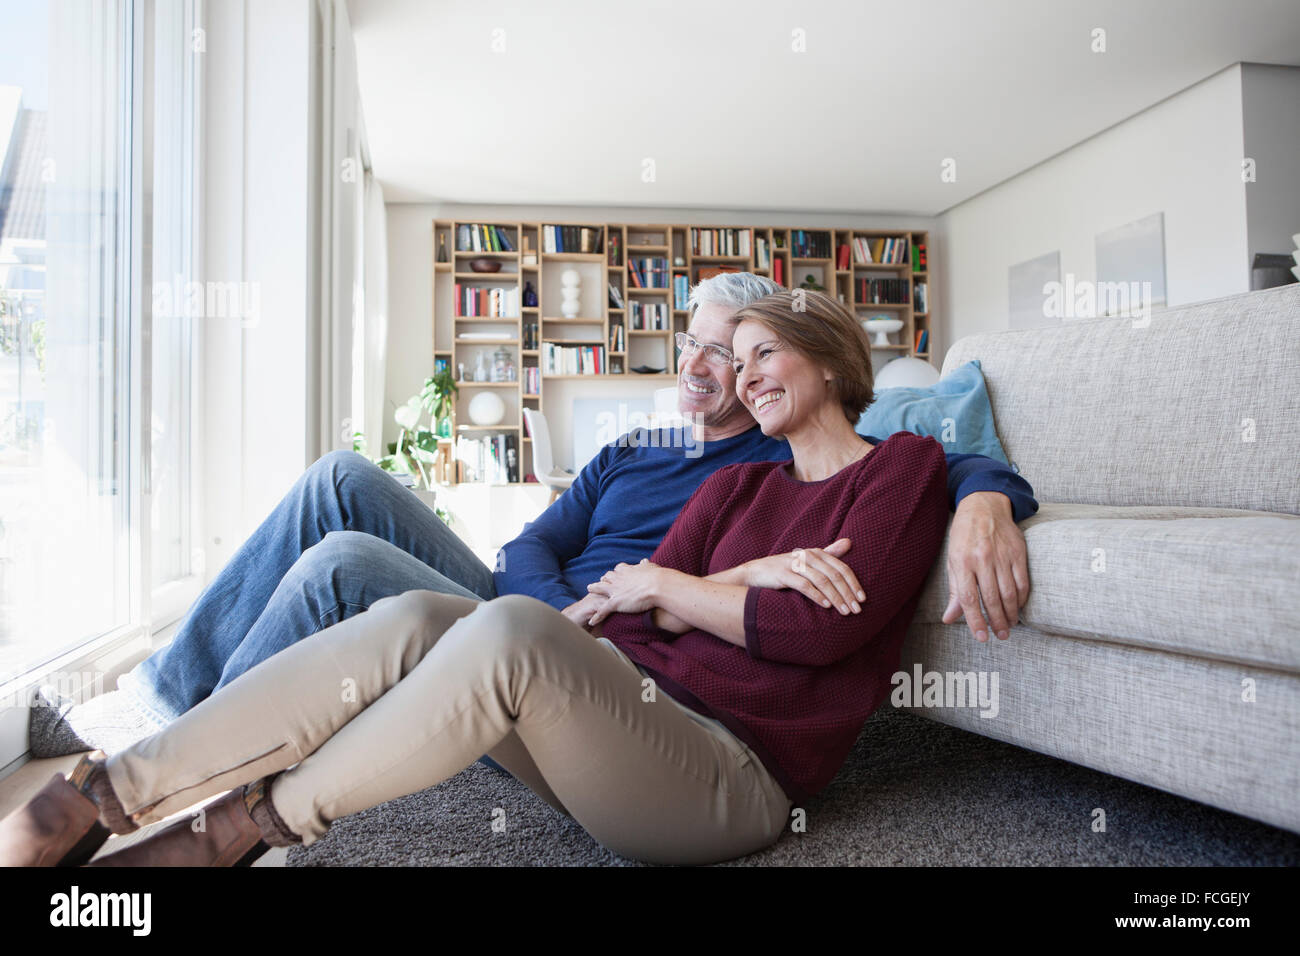 Happy couple sitting side by side on the floor of their living room Stock Photo